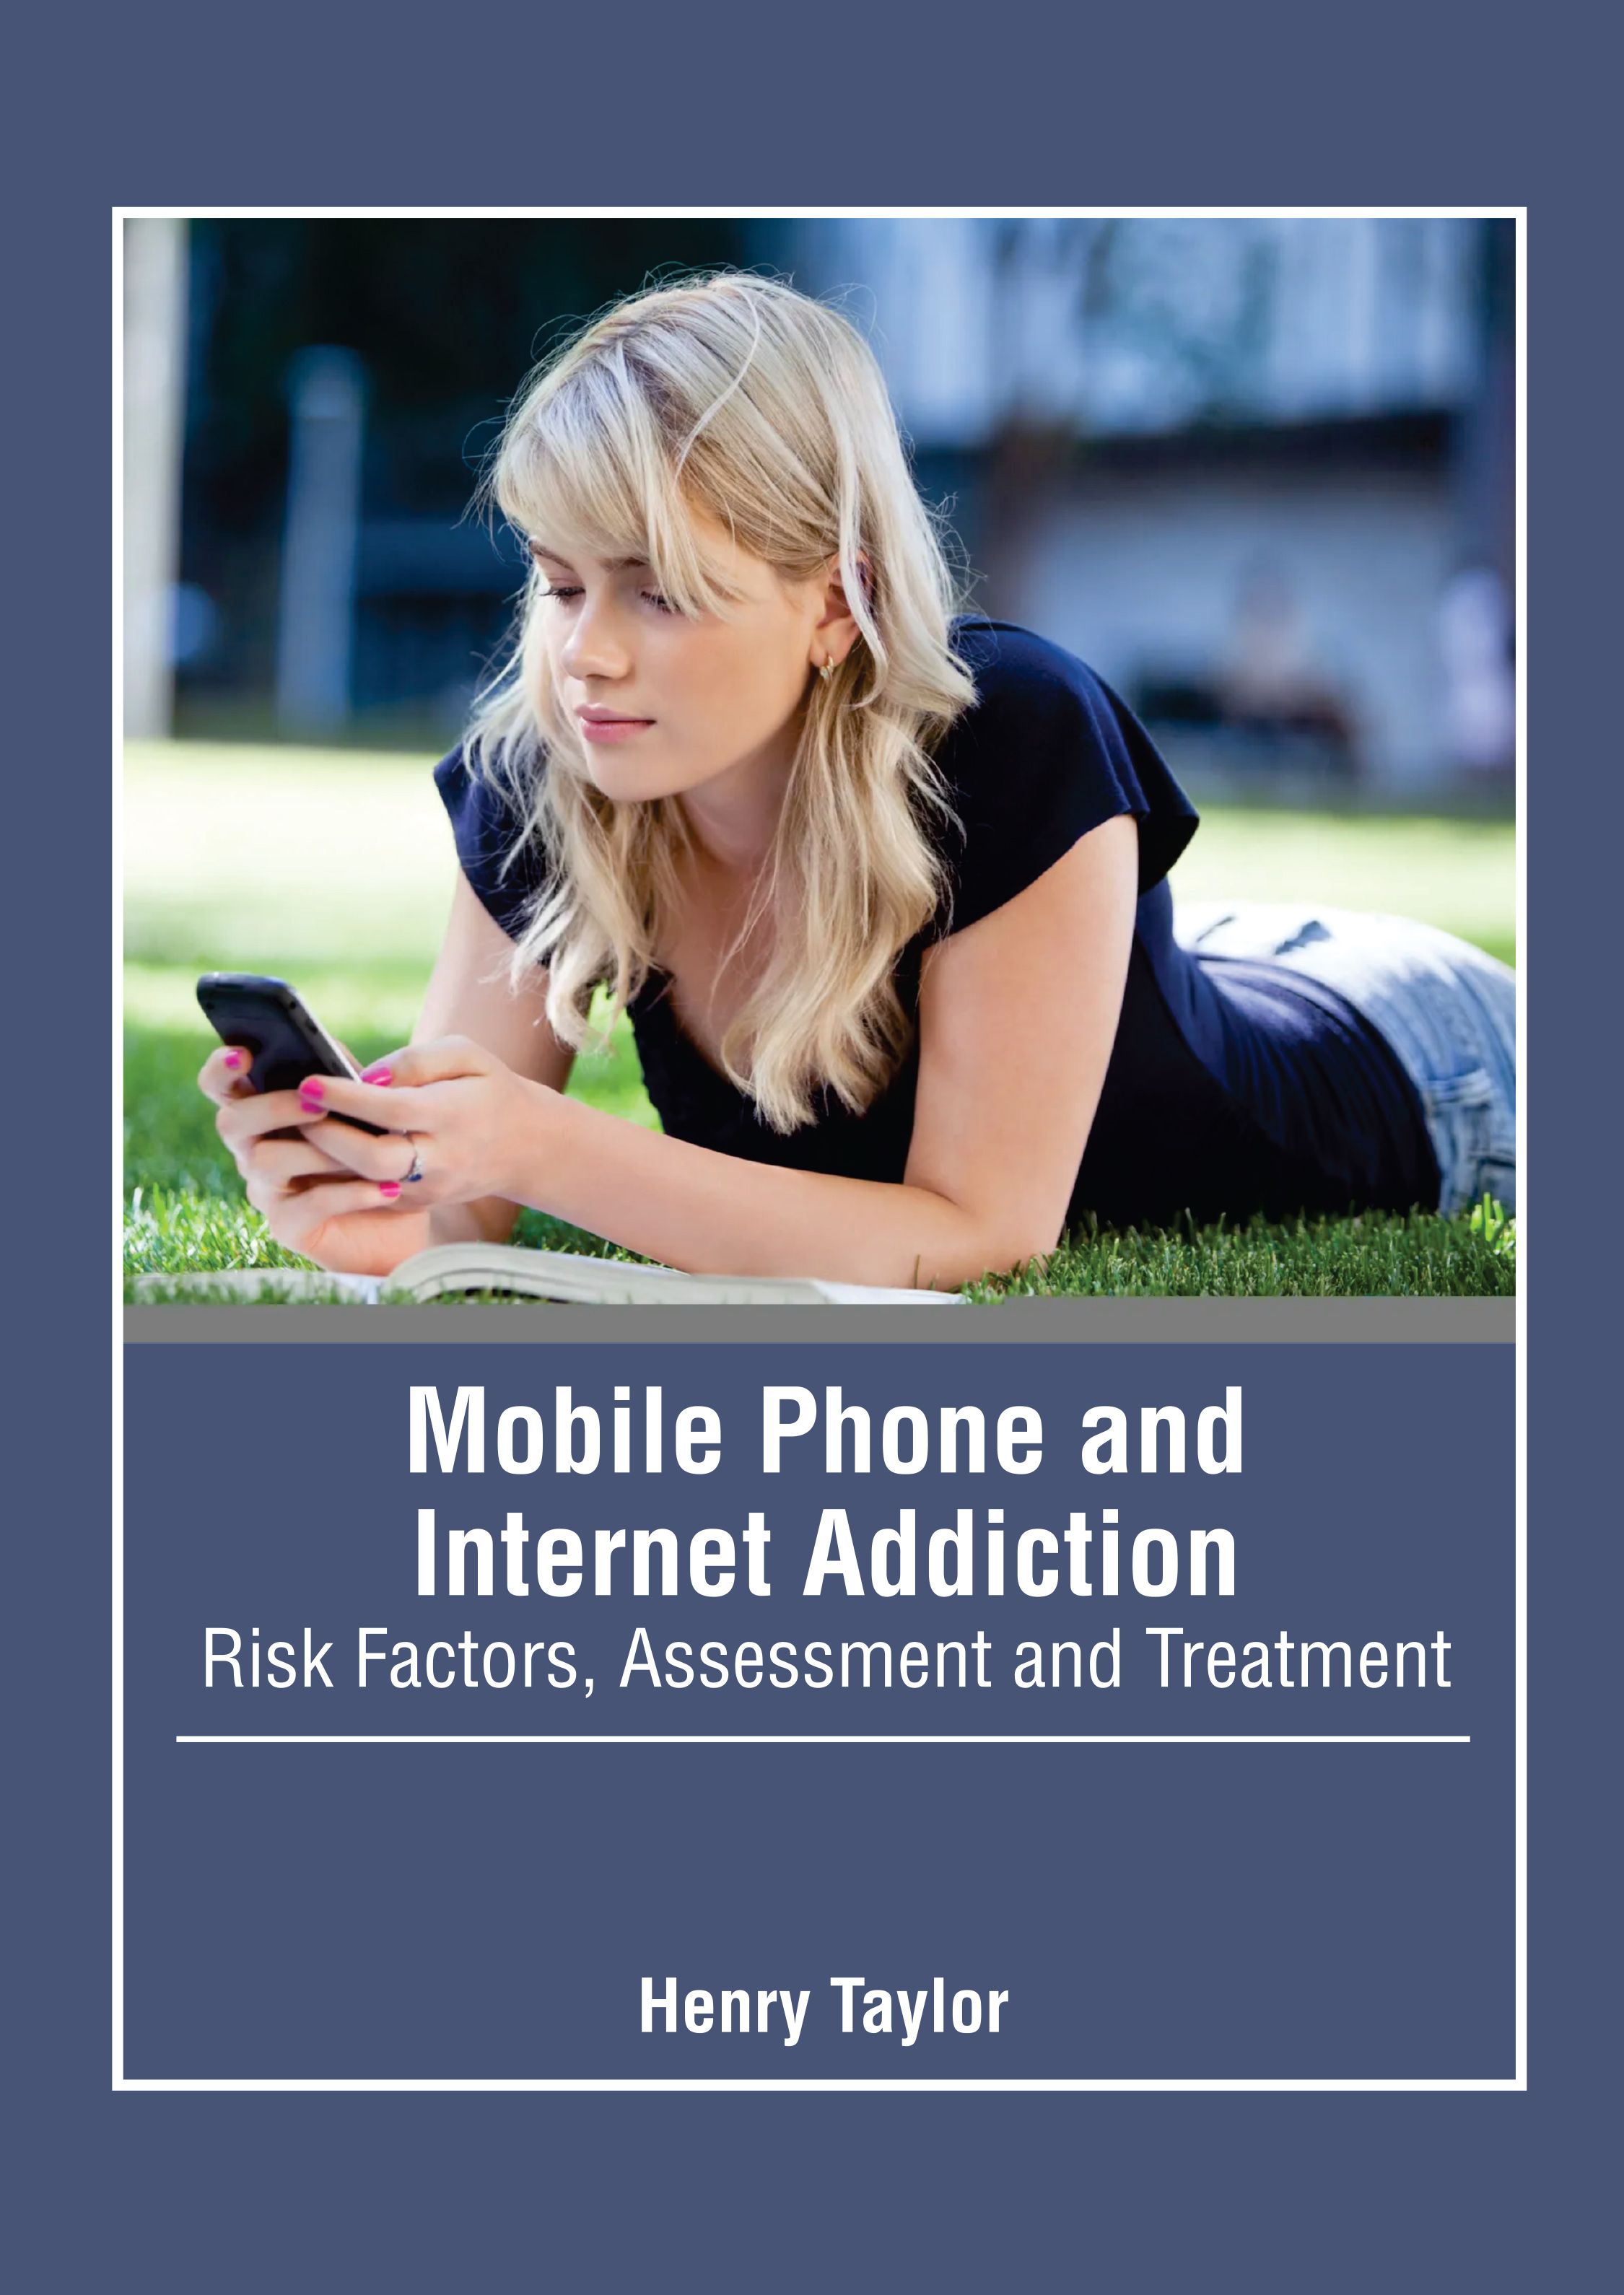 

exclusive-publishers/american-medical-publishers/mobile-phone-and-internet-addiction-risk-factors-assessment-and-treatment-9798887402710